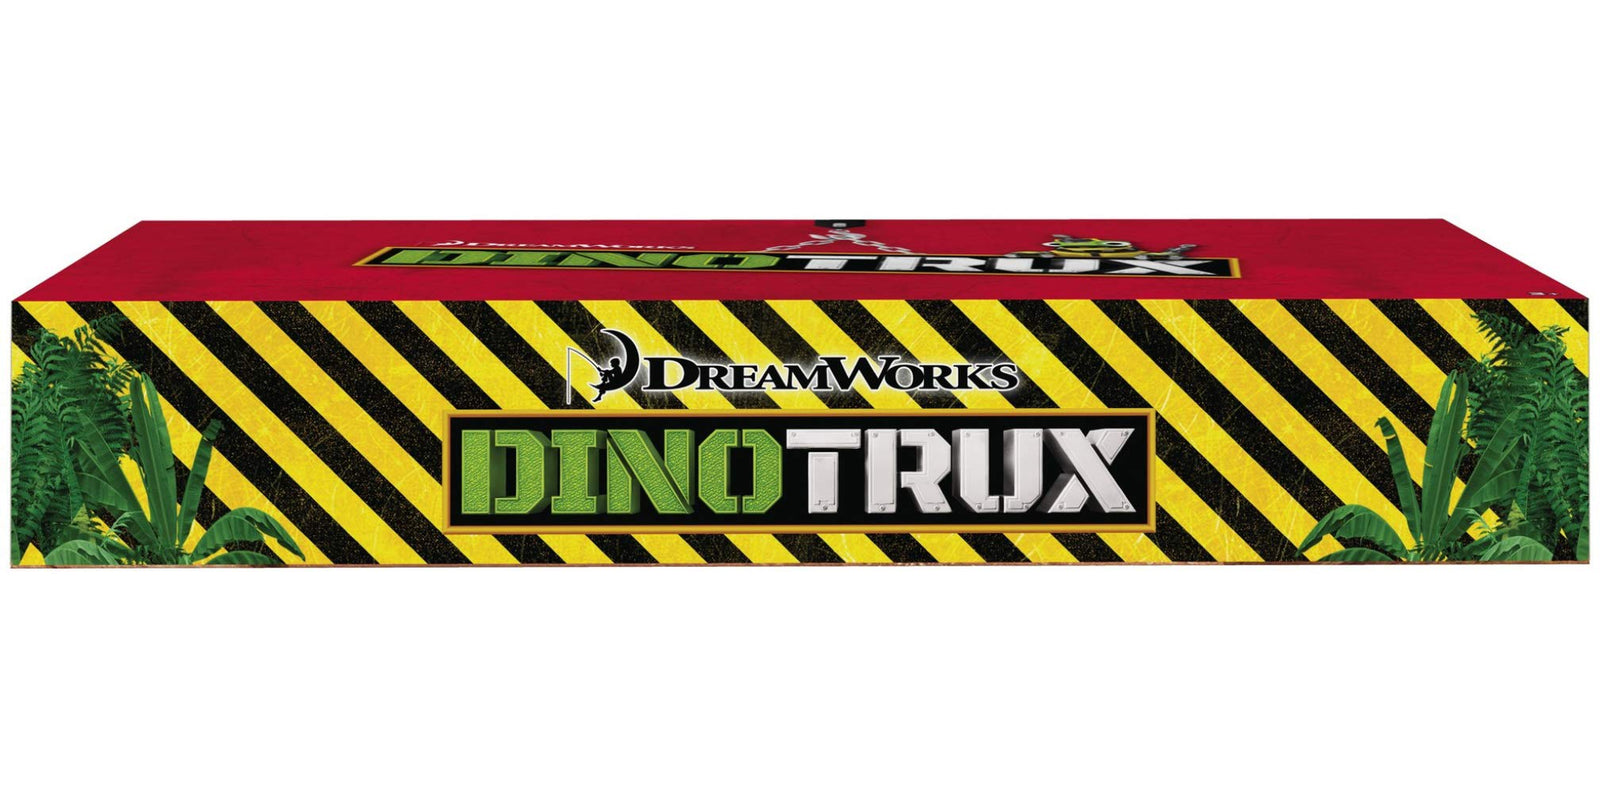 Dinotrux Bundle Die-cast Characters and Reptools Featuring Rolling Wheels [Amazon Exclusive]